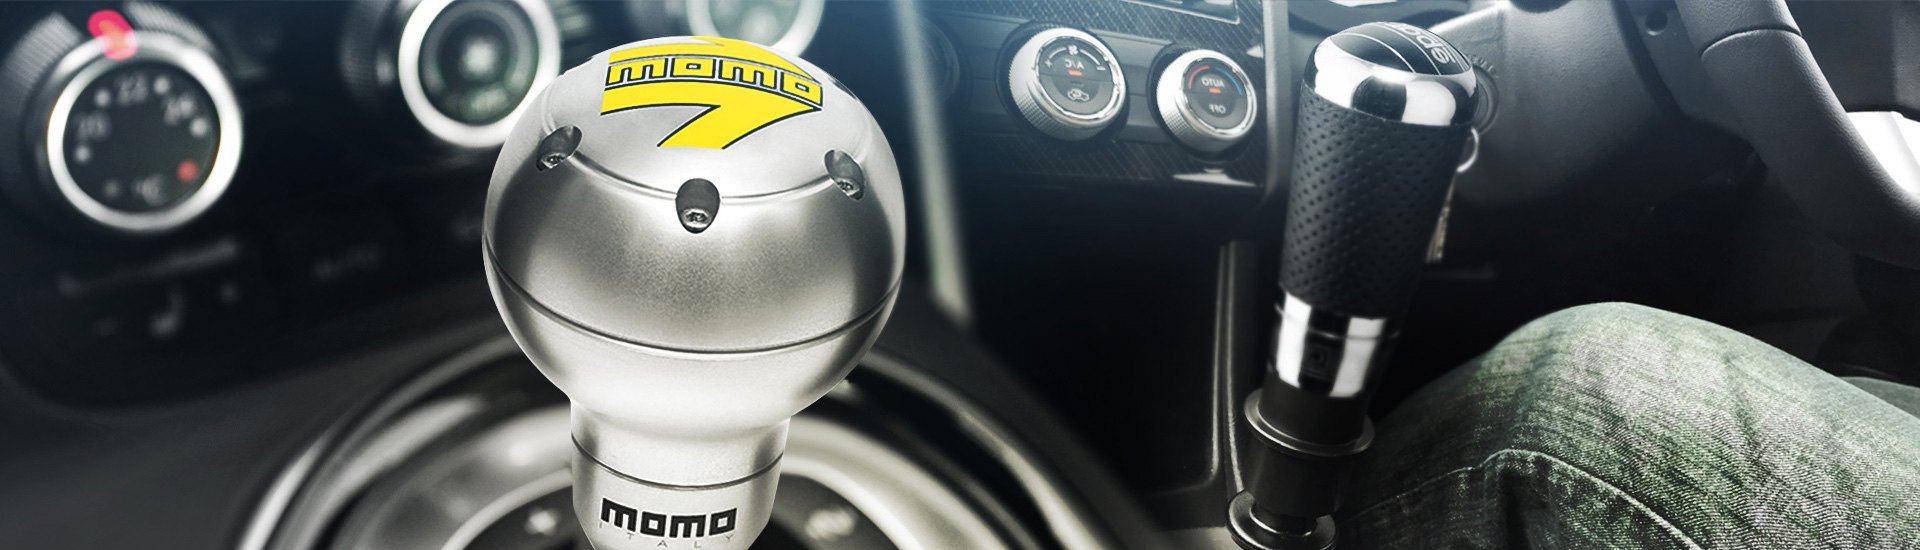 Custom Shift Knobs | Can You Handle One In Your Ride?